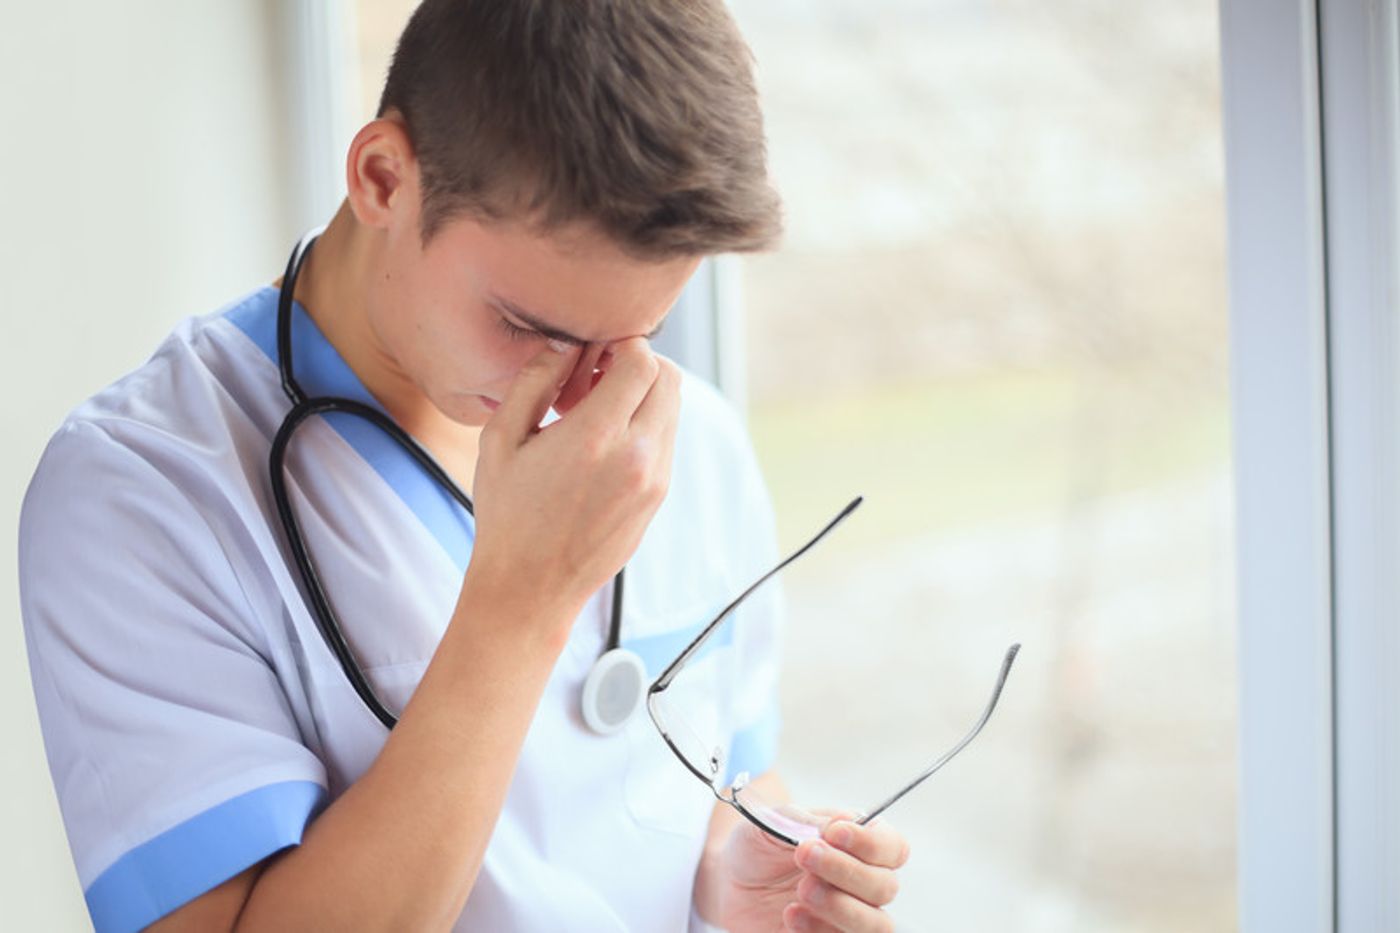 More than one in four doctors are depressed